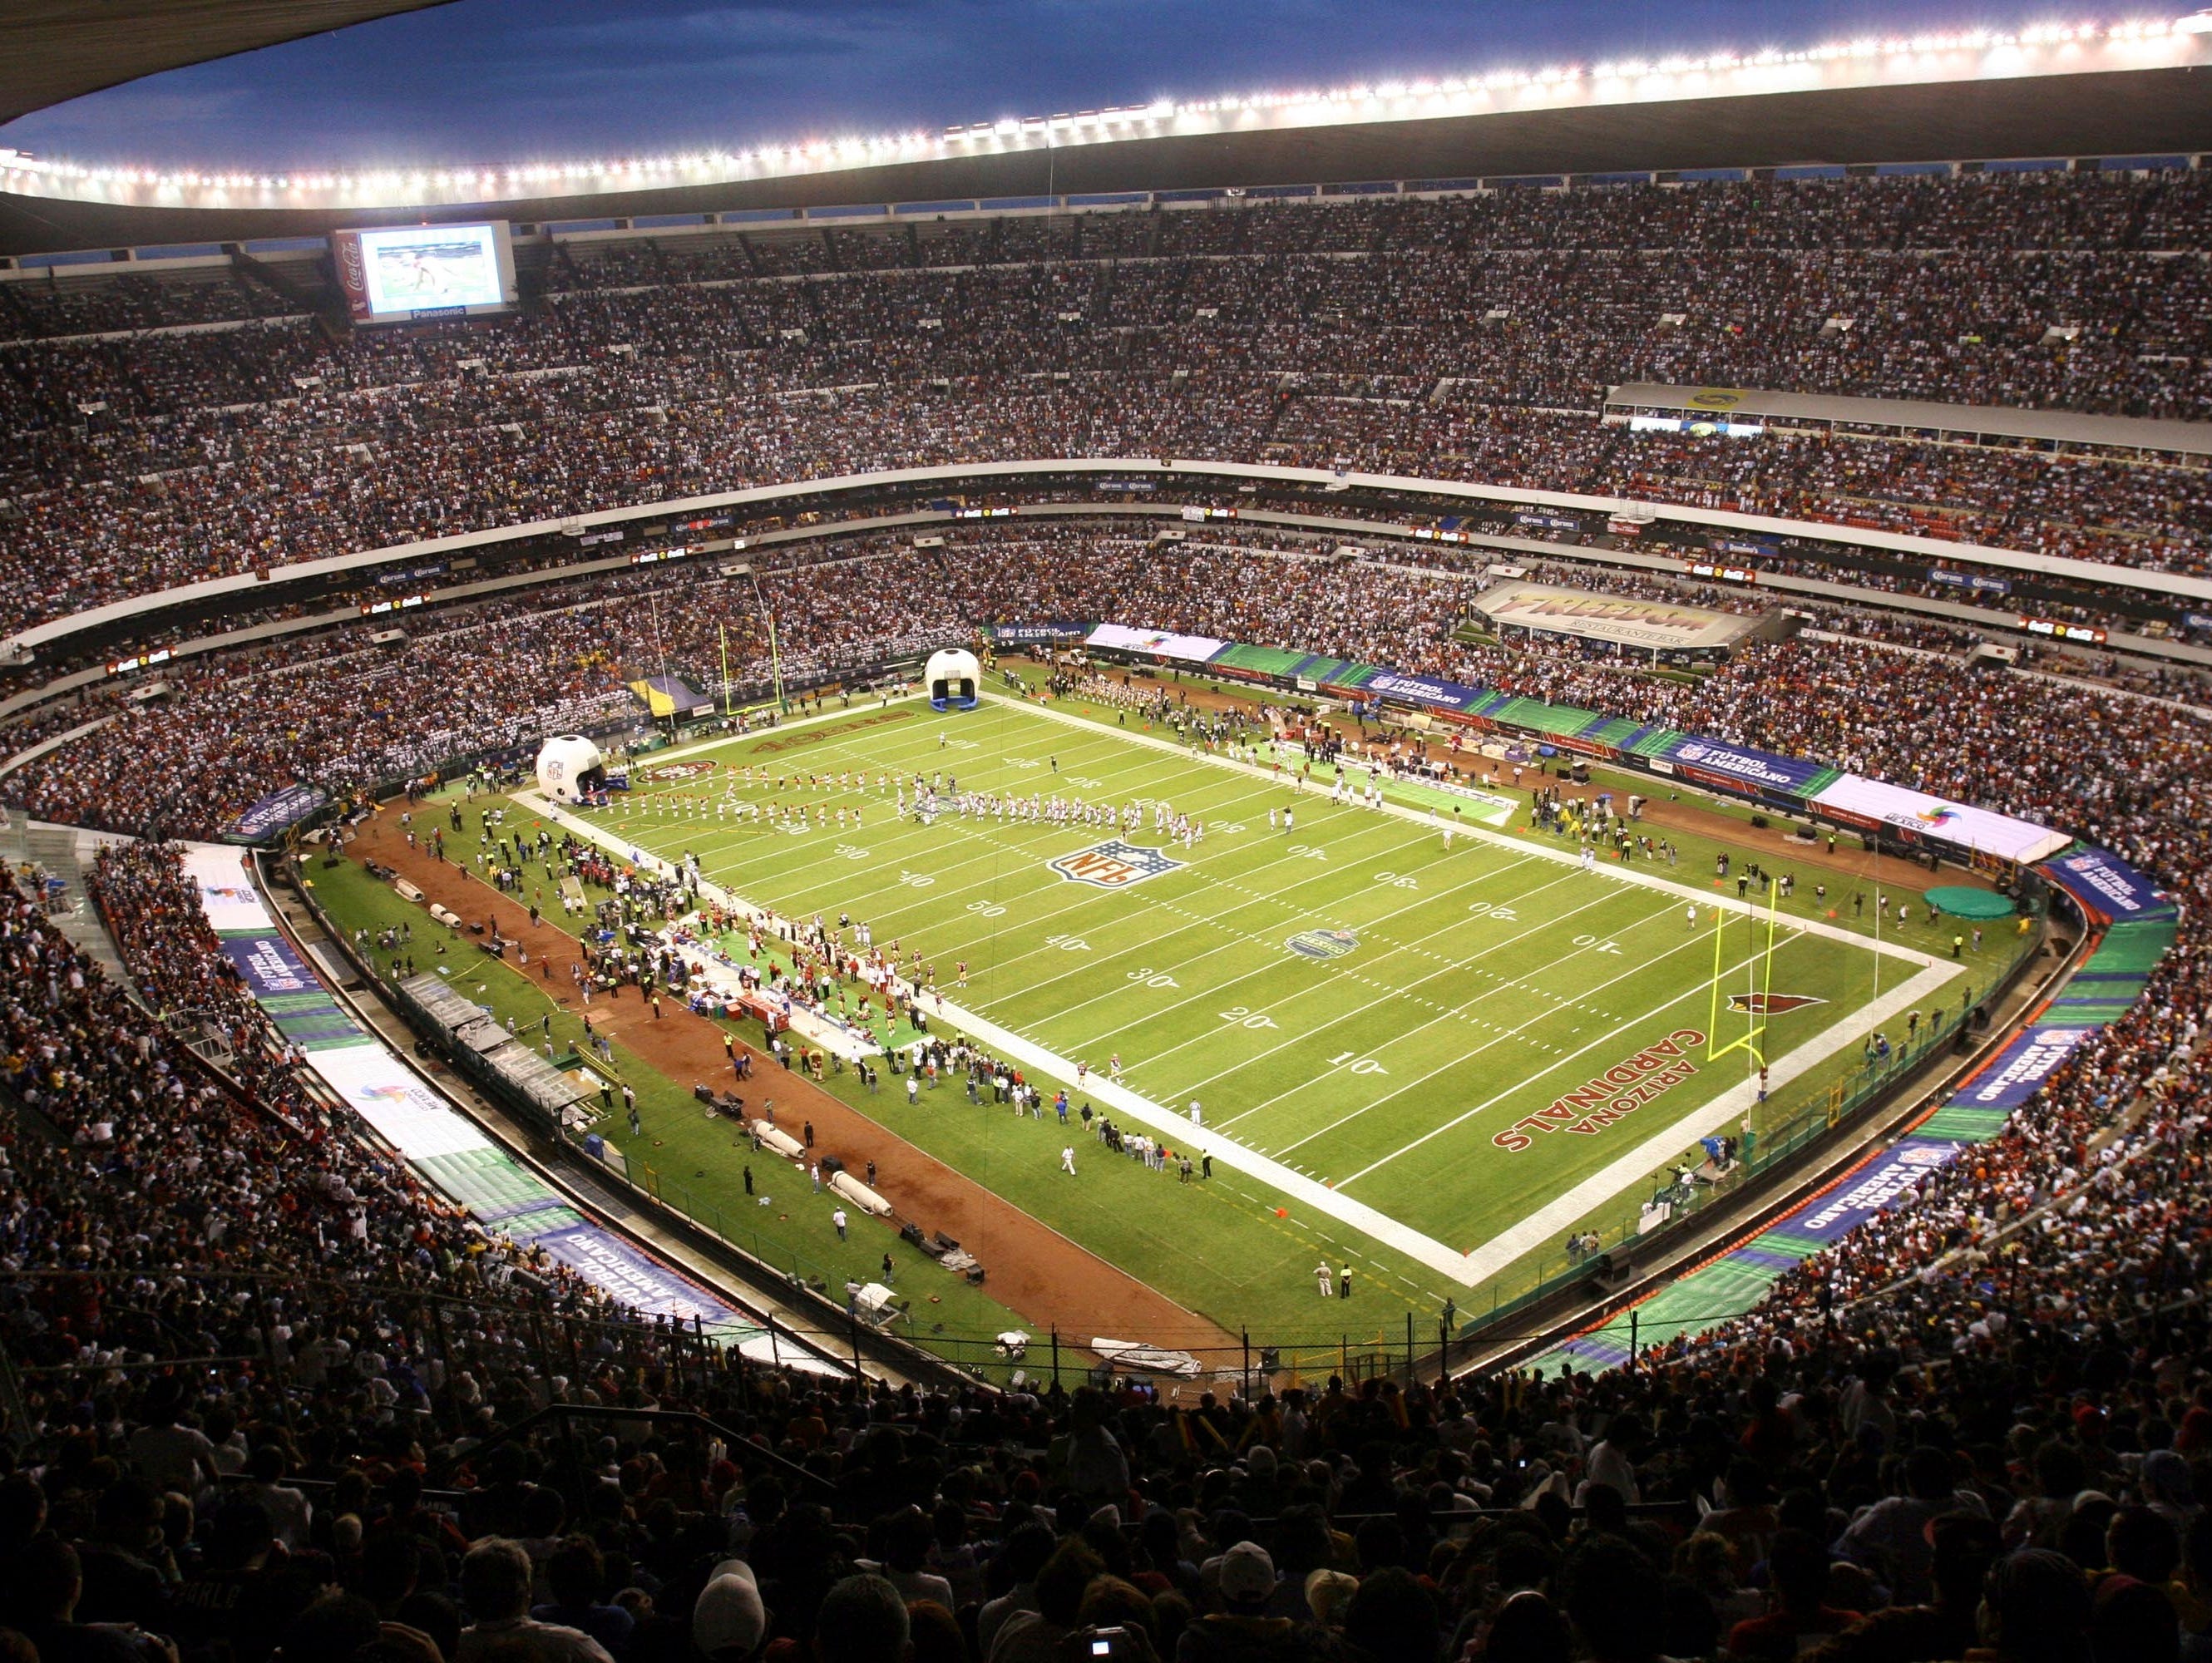 In this Oct. 2, 2005, file photo, Azteca Stadium in Mexico City, Mexico is shown prior to the start of a regular season NFL game between the Arizona Cardinals and San Francisco 49ers. Eleven years after the network telecast an NFL game from Mexico Ci